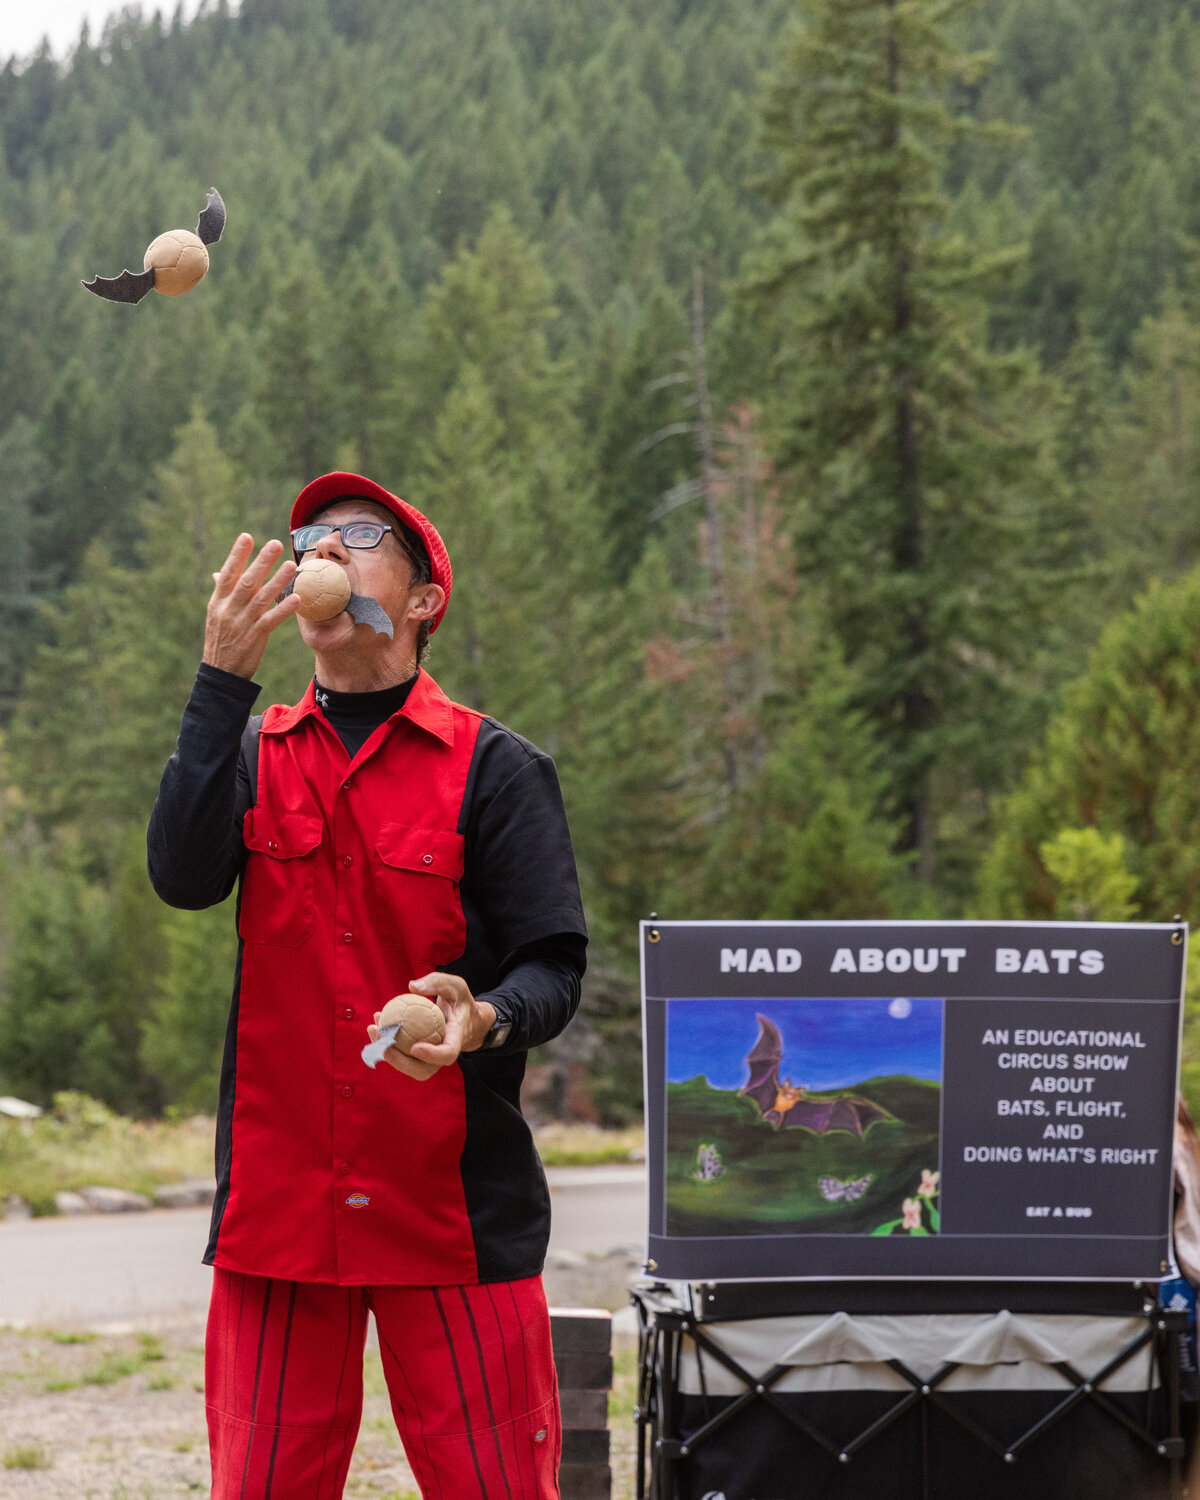 JuggleMania’s Rhys Thomas throws balls with wings into the air during a Vaudeville-esque show about bats at Mount Rainier National Park on Tuesday, Sept. 12.